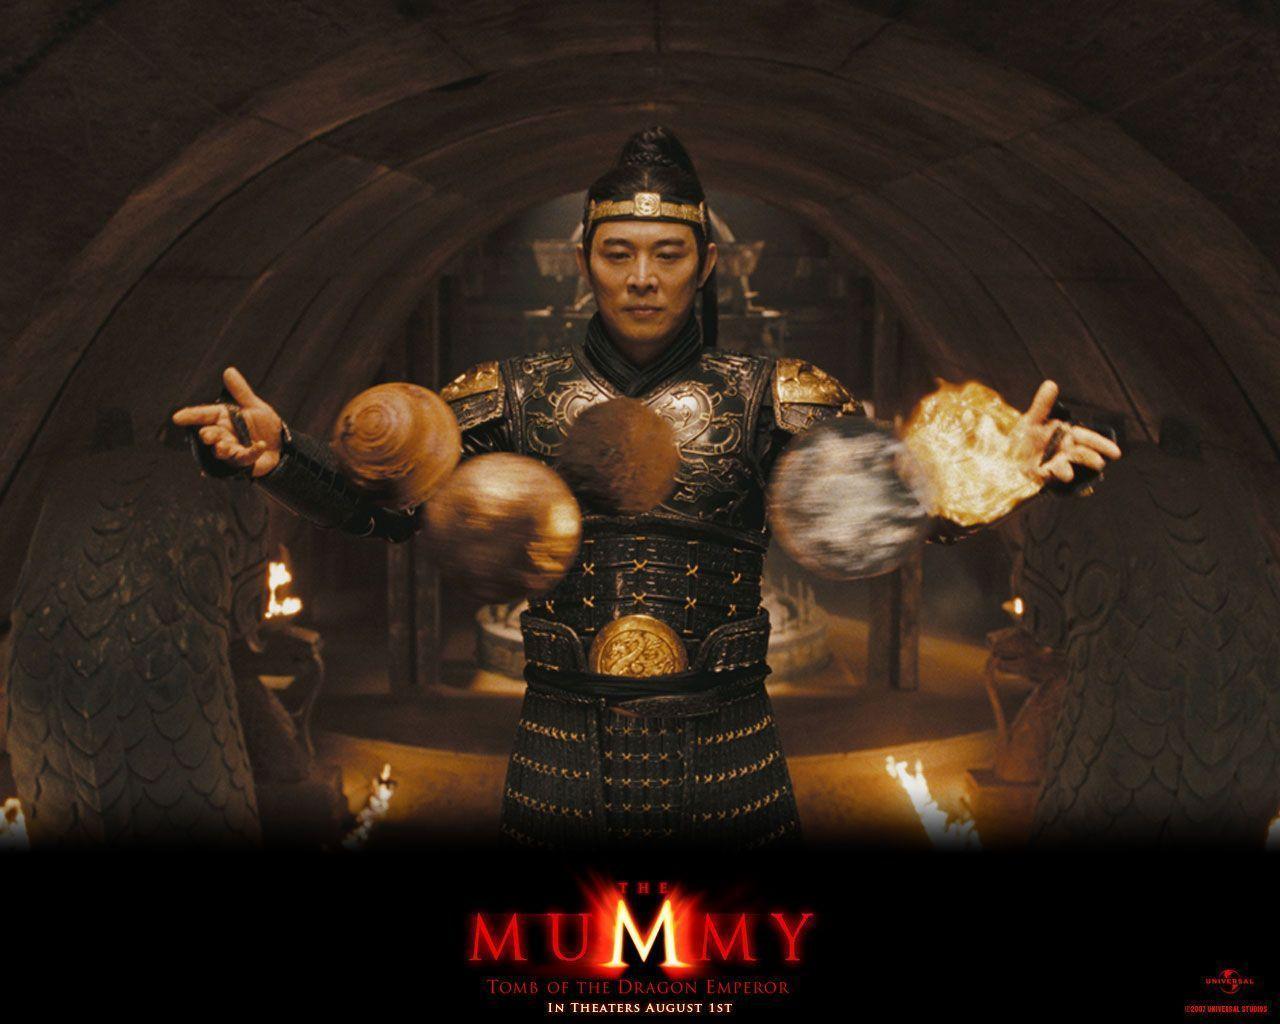 The Mummy: Tomb Of The Dragon Emperor Wallpaper. The Mummy